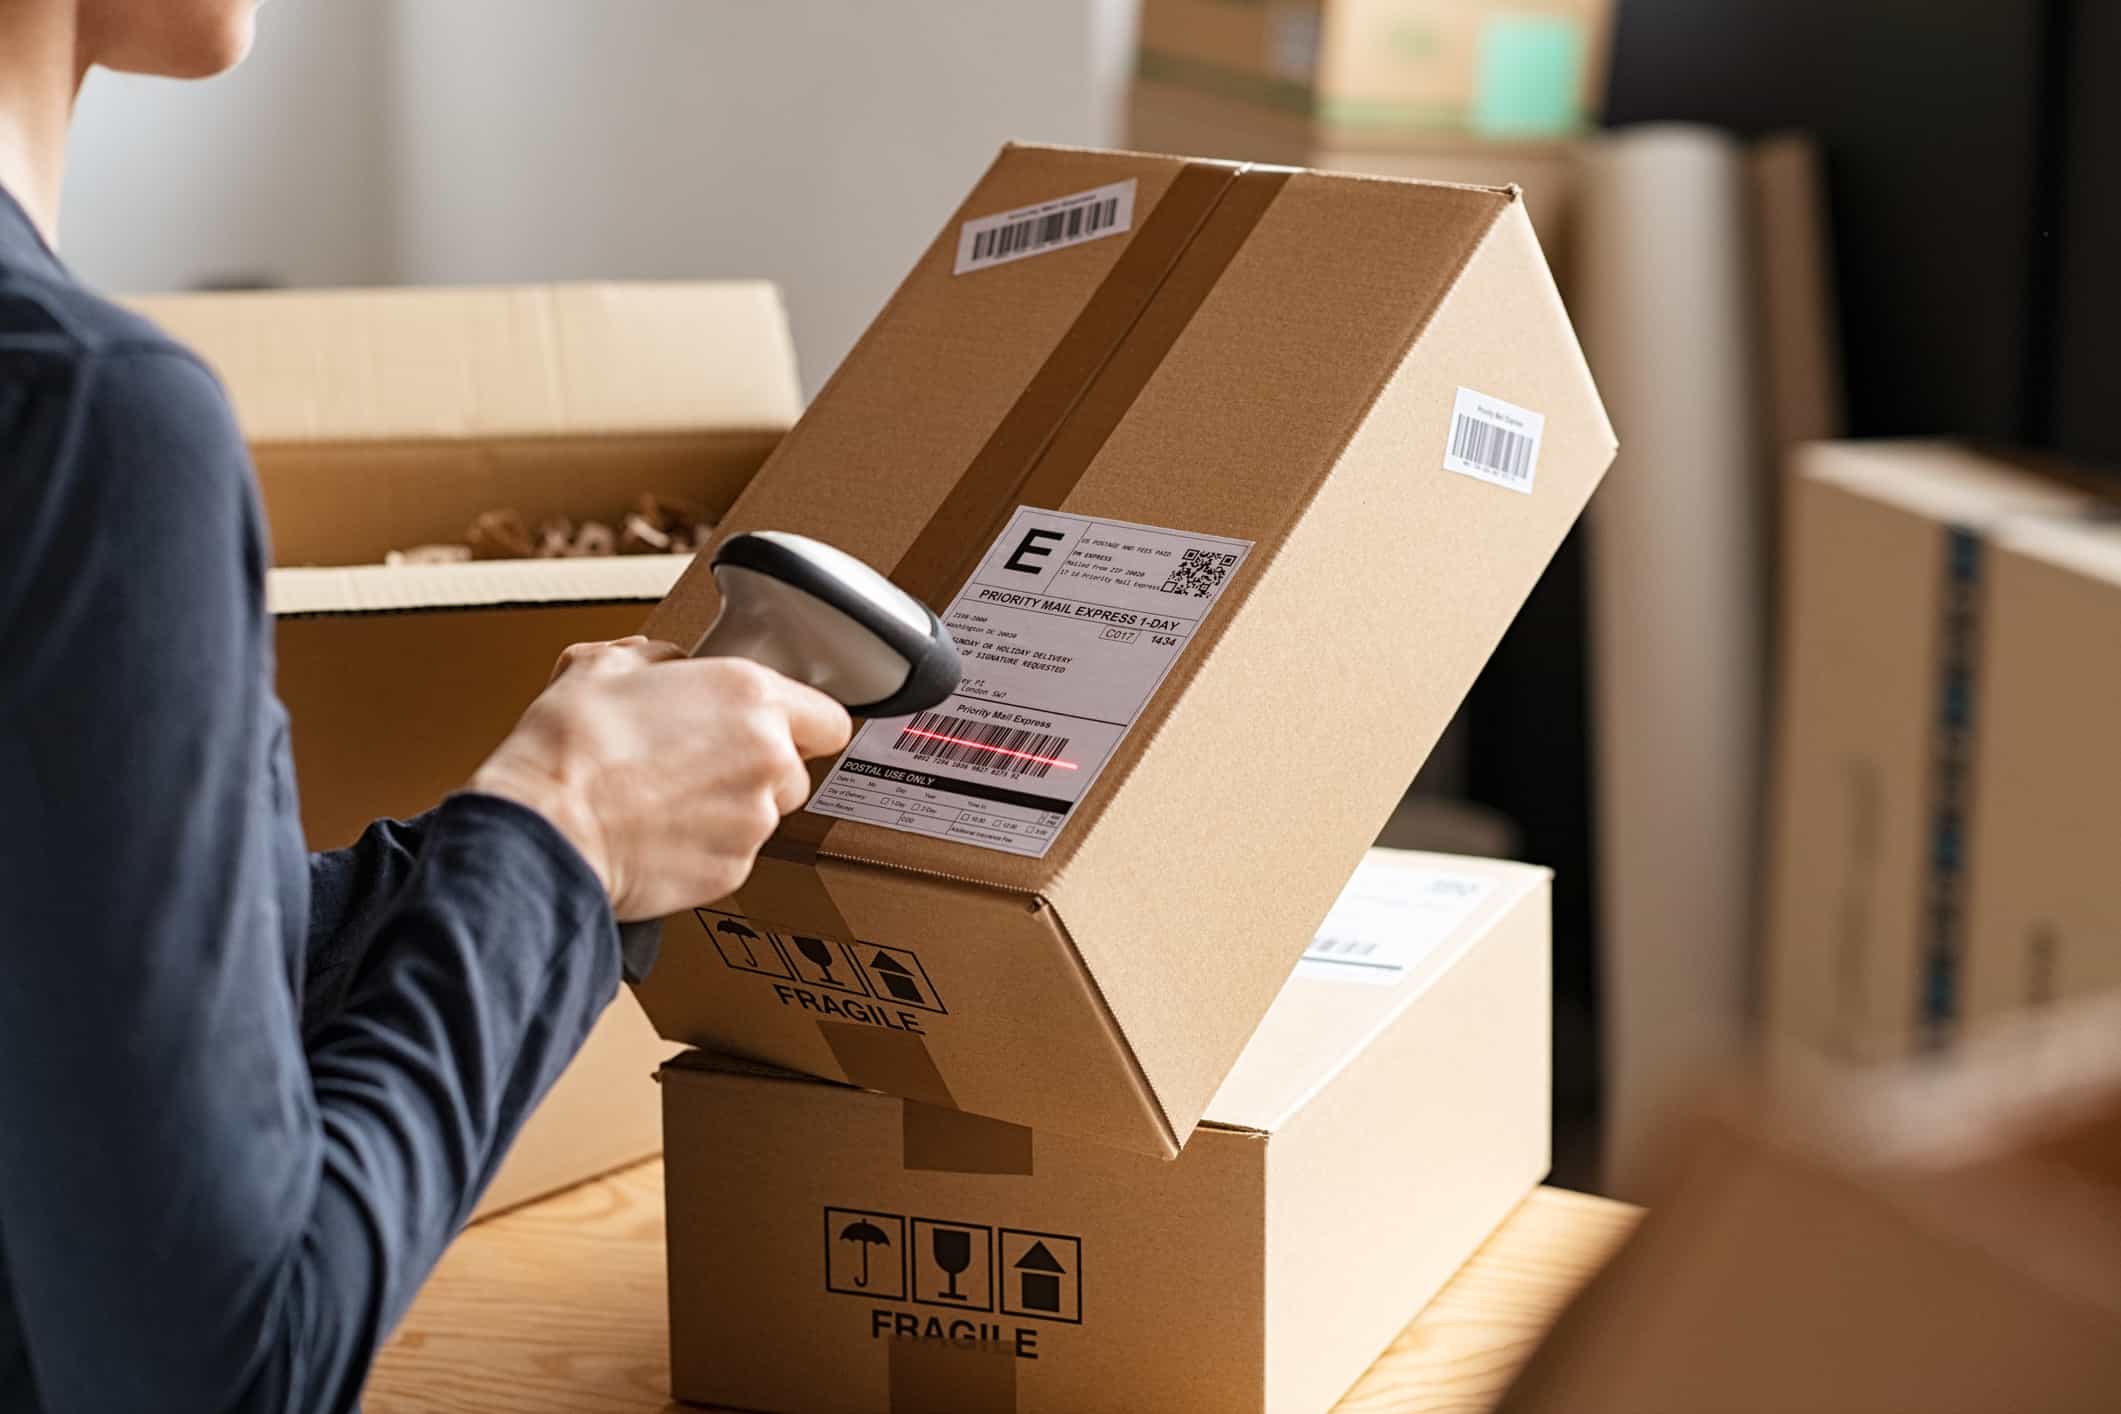 Image of Woman Scanning Package / Parcel